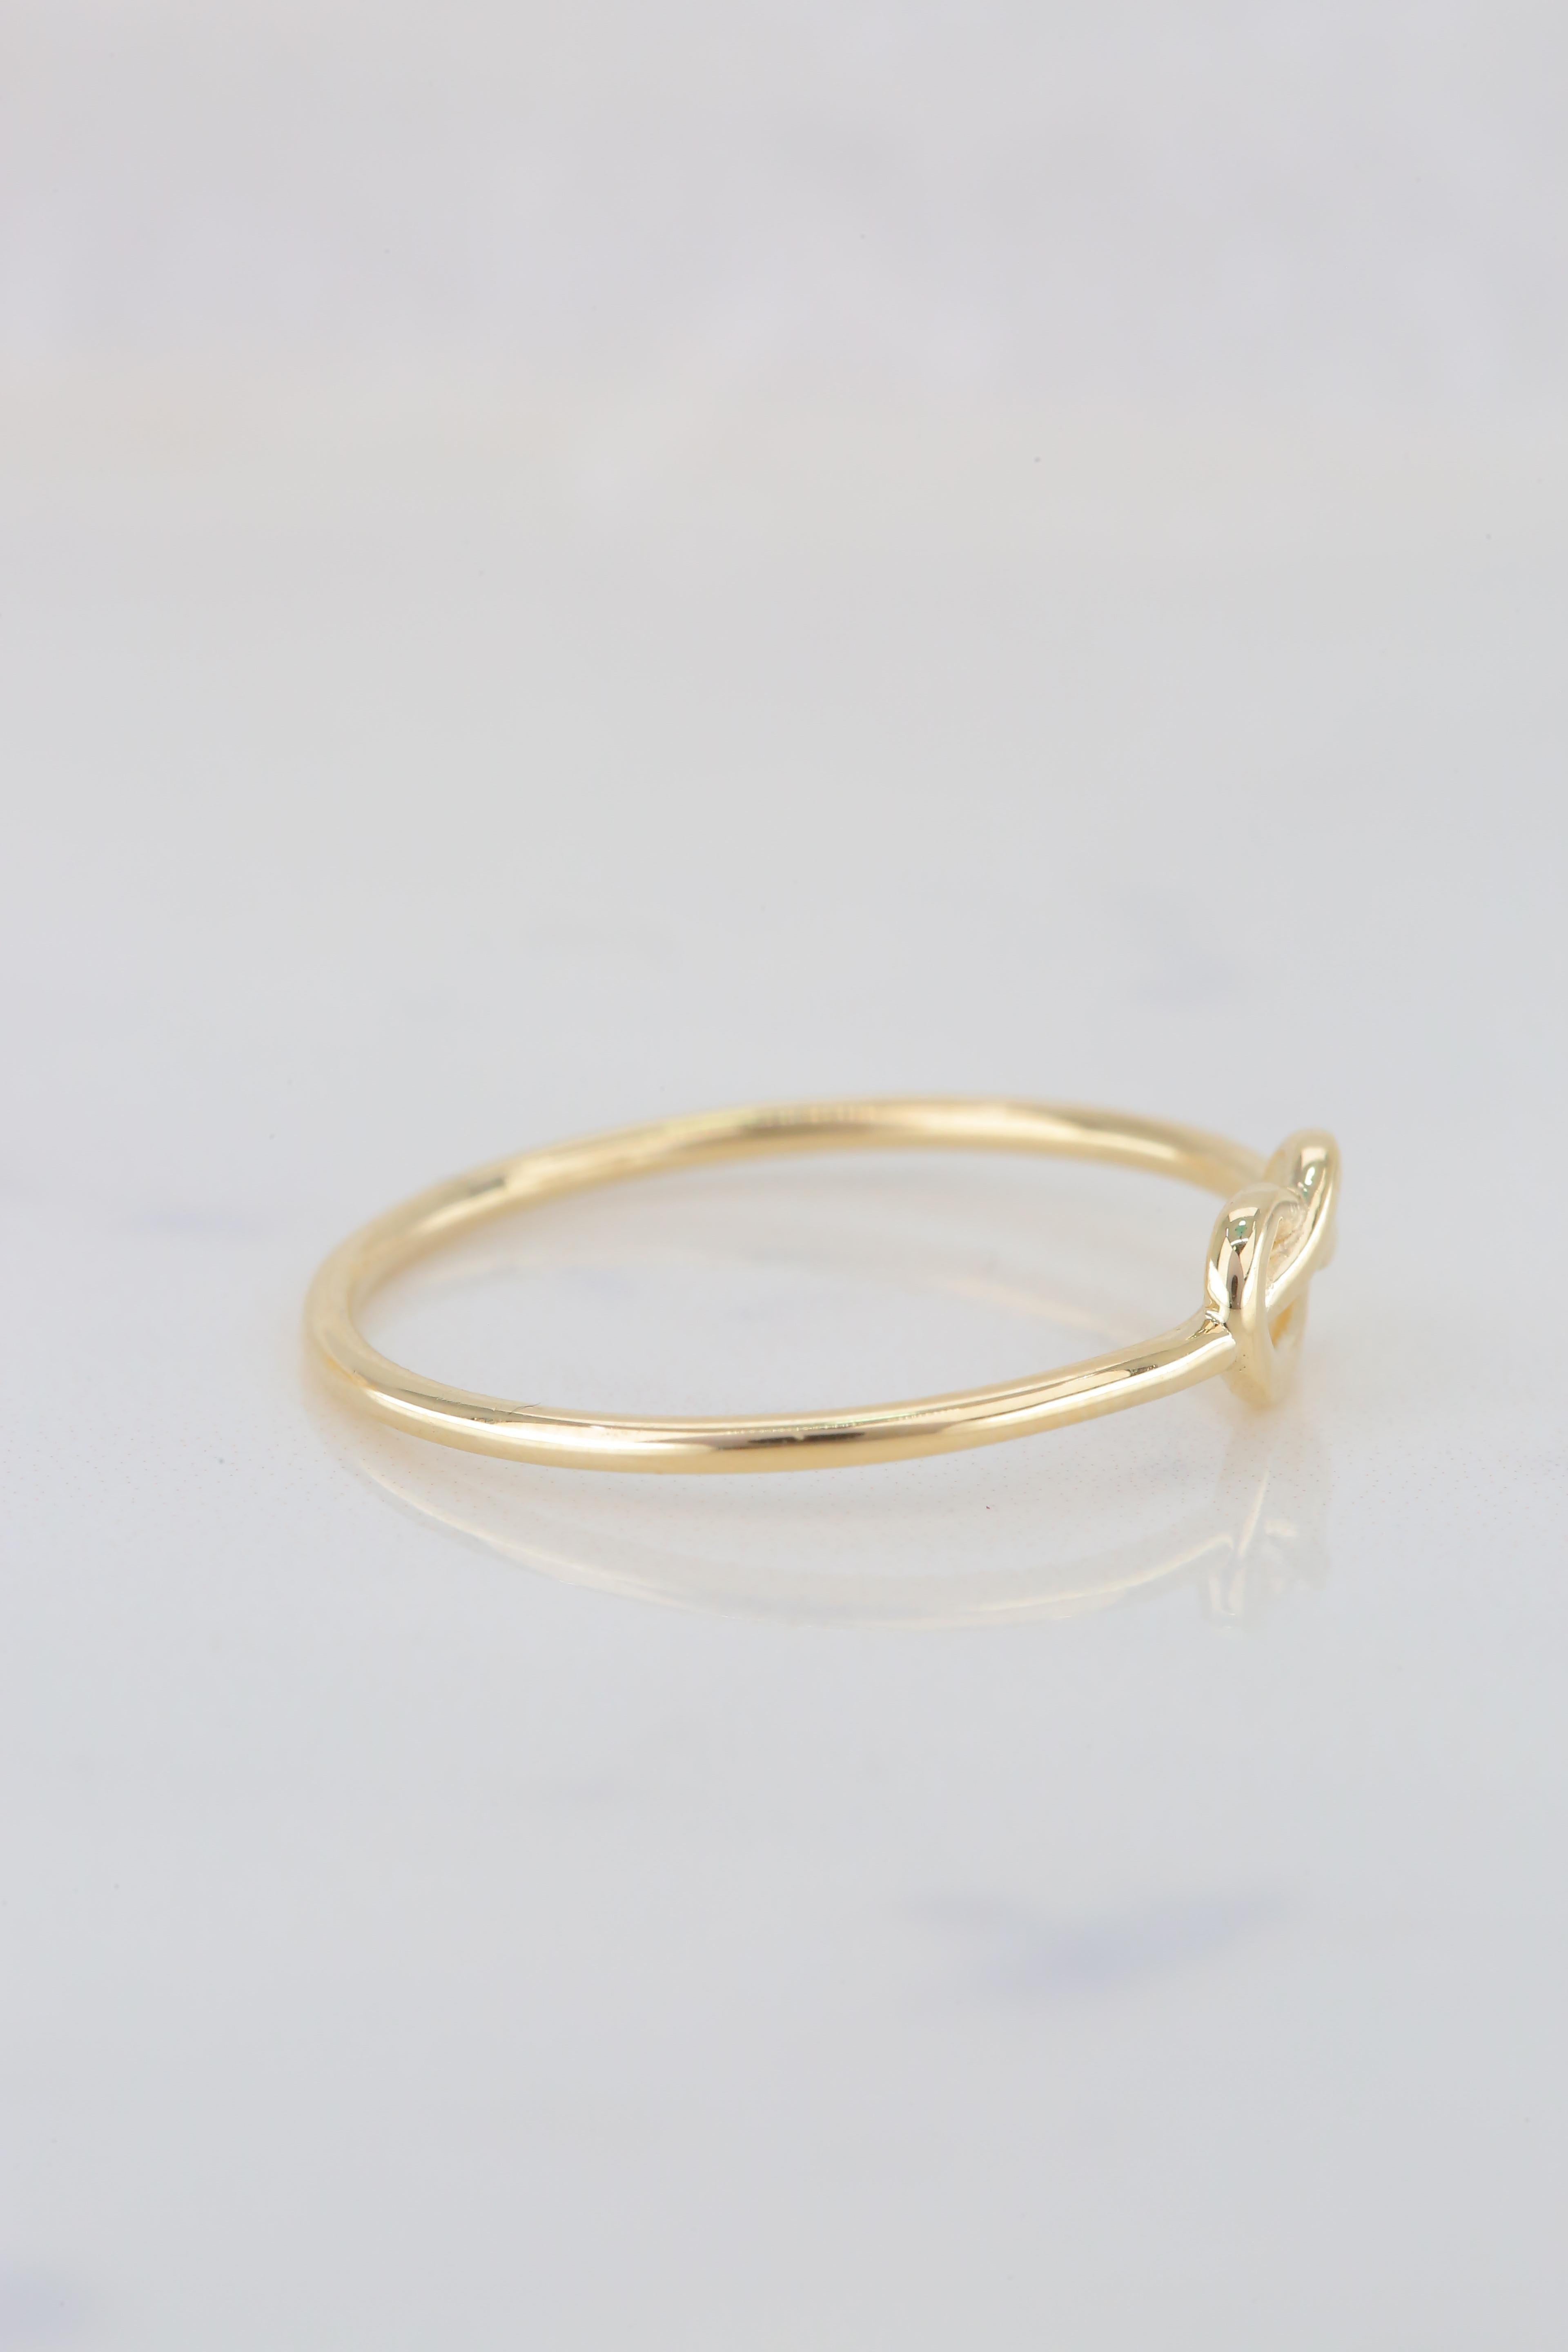 For Sale:  Gold Knot Ring, 14k Solid Gold, Dainty Ring, Minimalist Style Ring 5